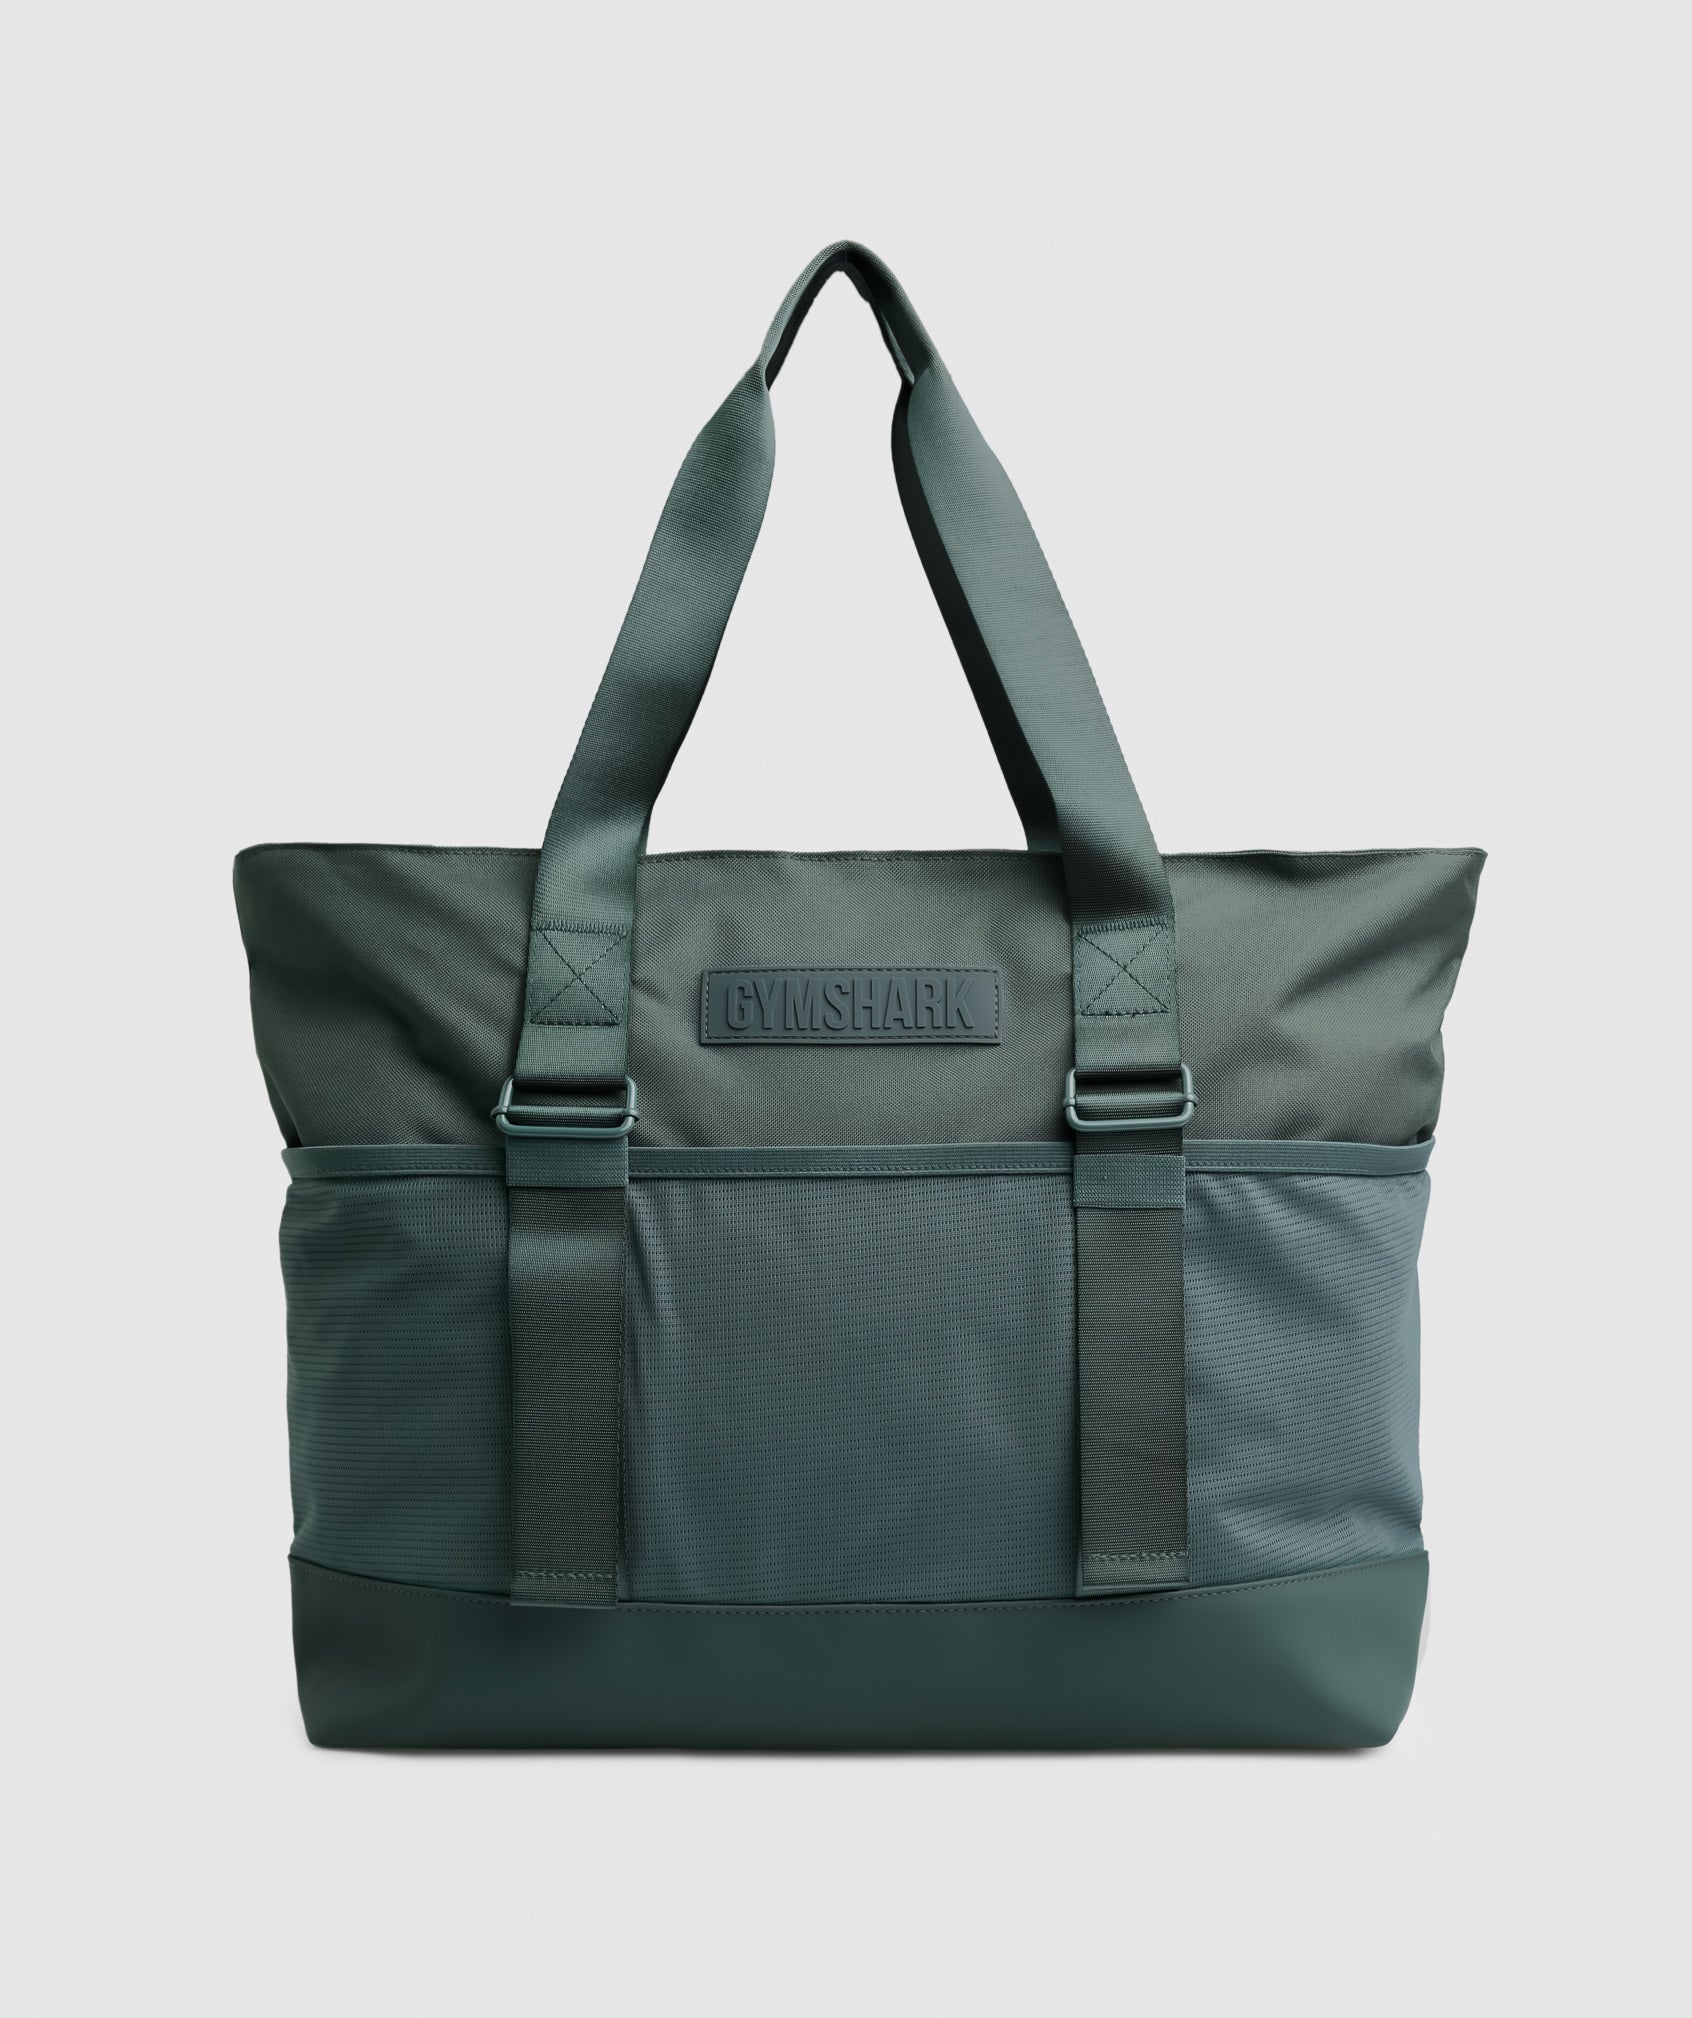 Everyday Tote in Fog  Green - view 1